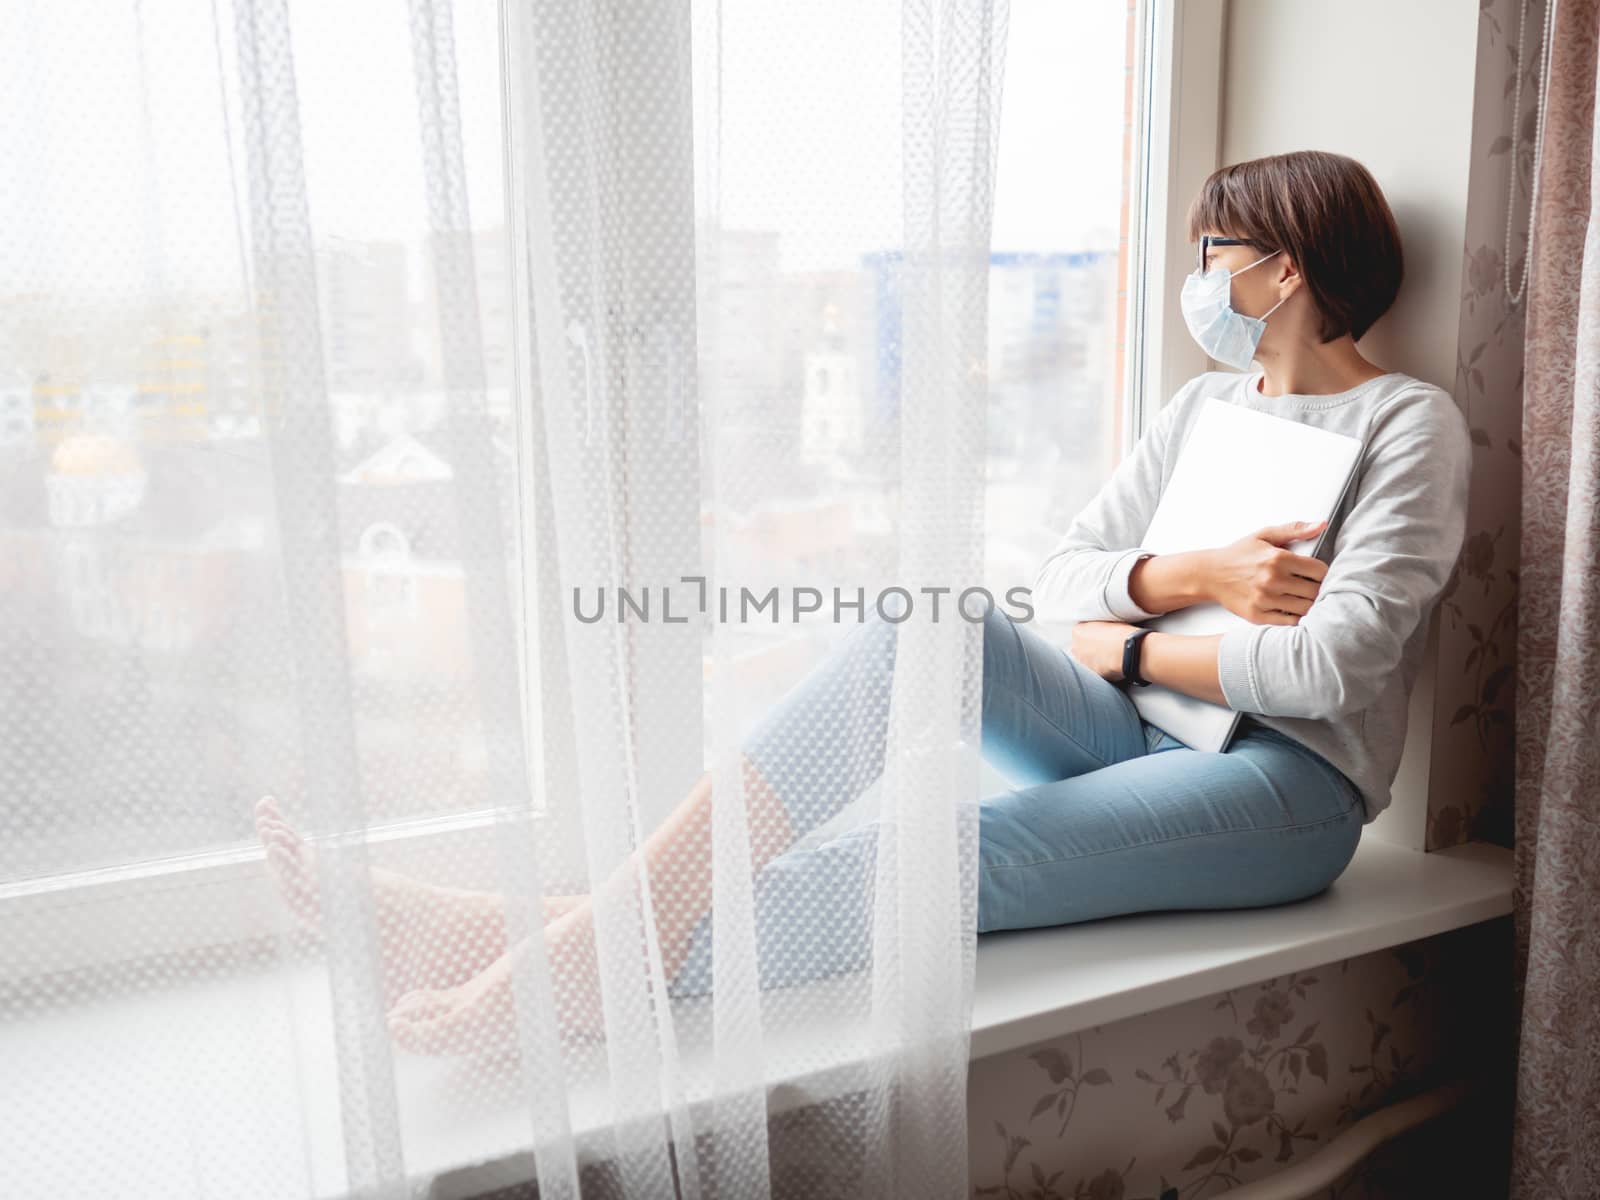 Woman in medical mask had lost her job. She sits on window sill with closed laptop. Lockdown quarantine because of coronavirus COVID19. Self isolation at home.